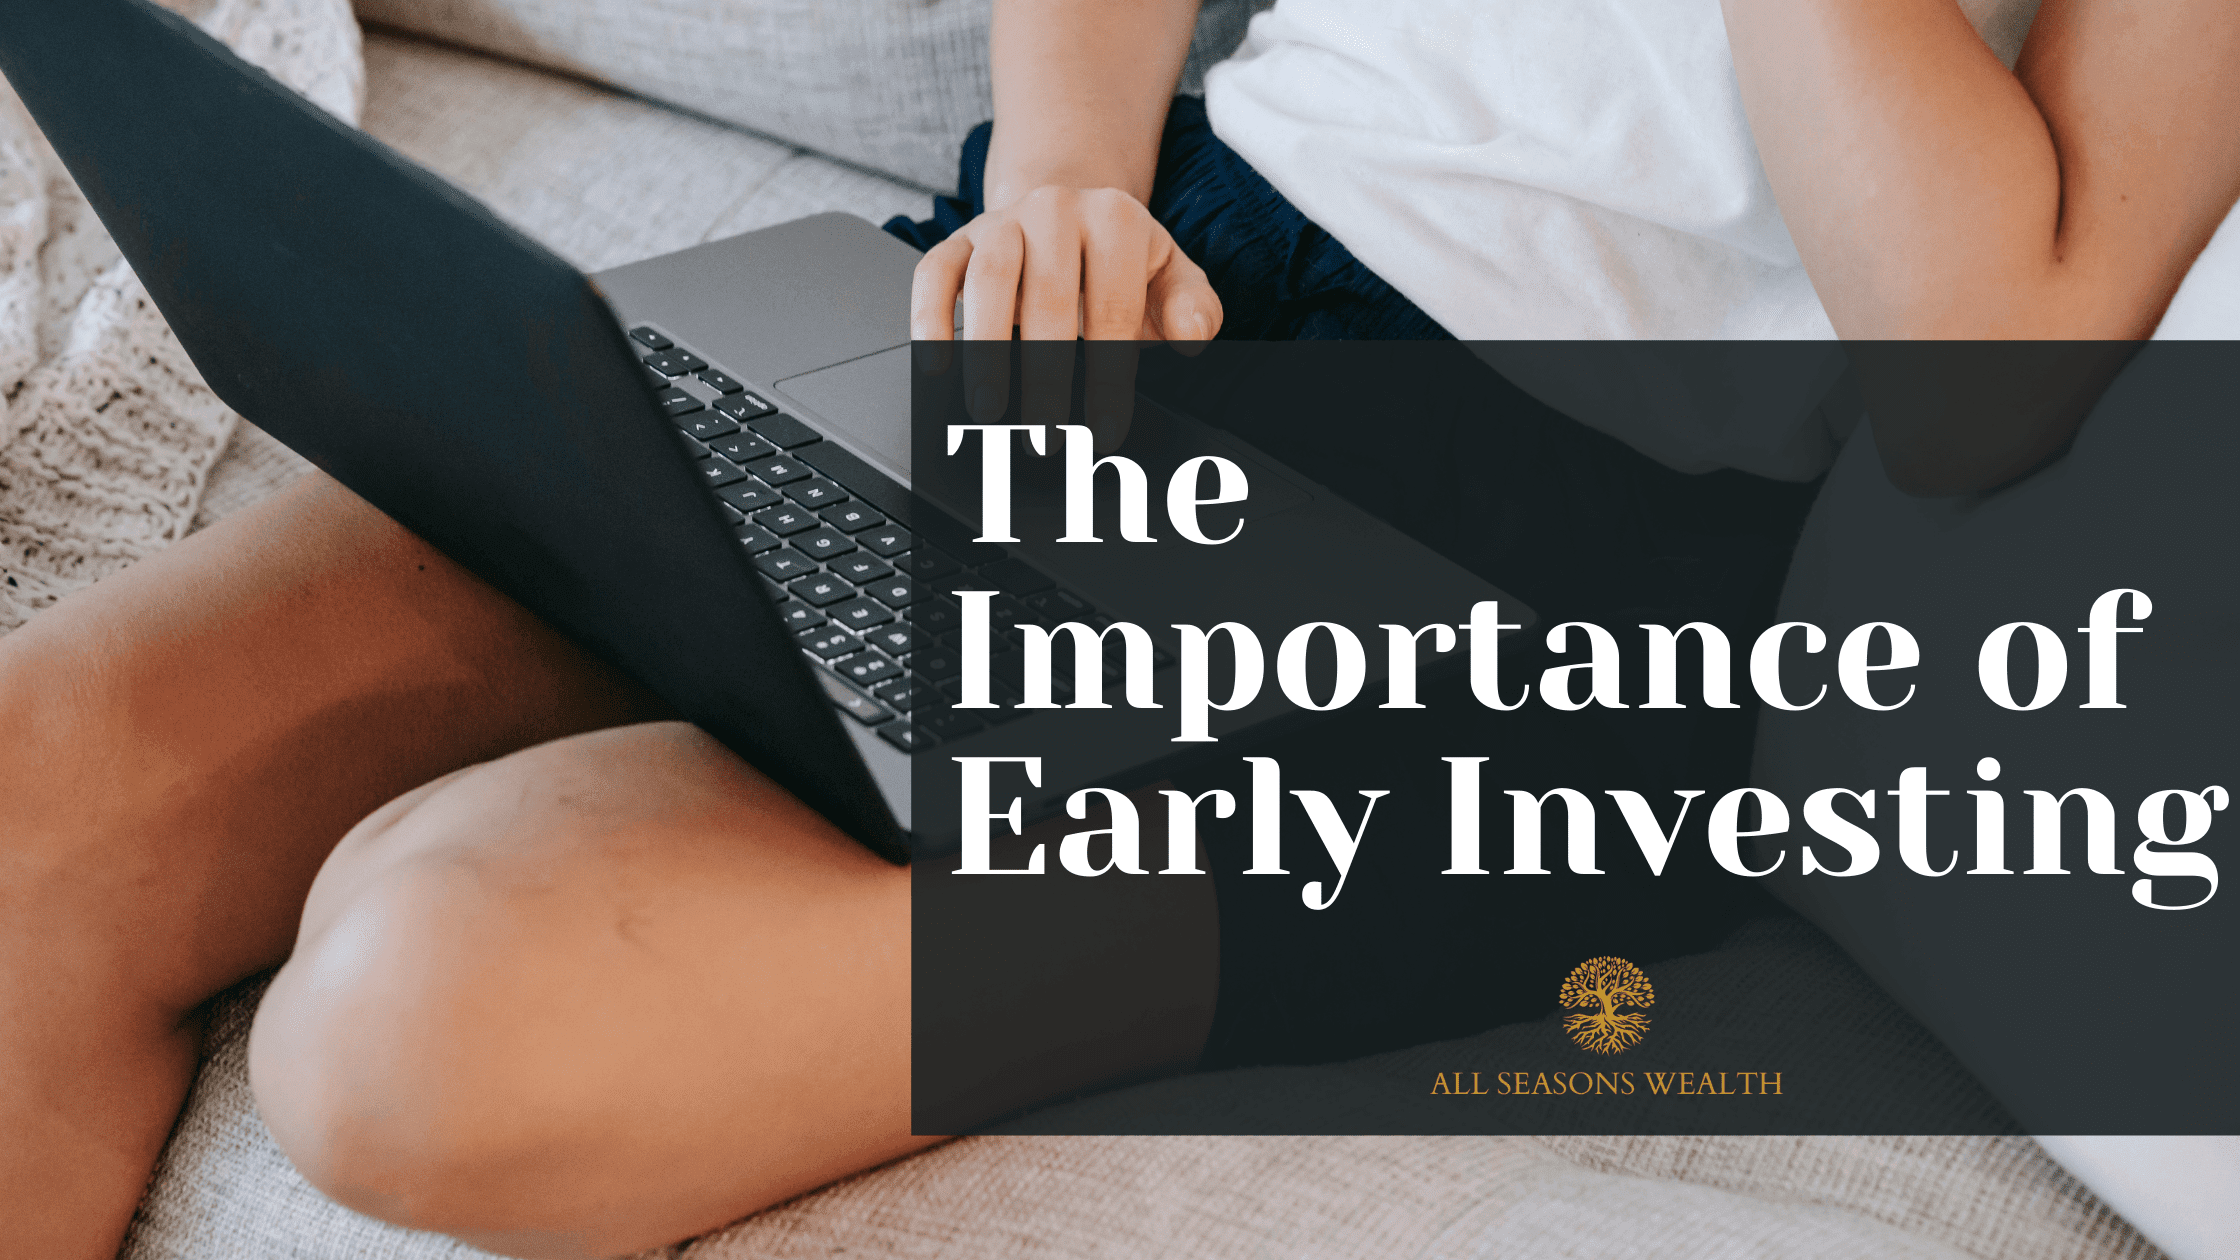 The Importance of Early Investing